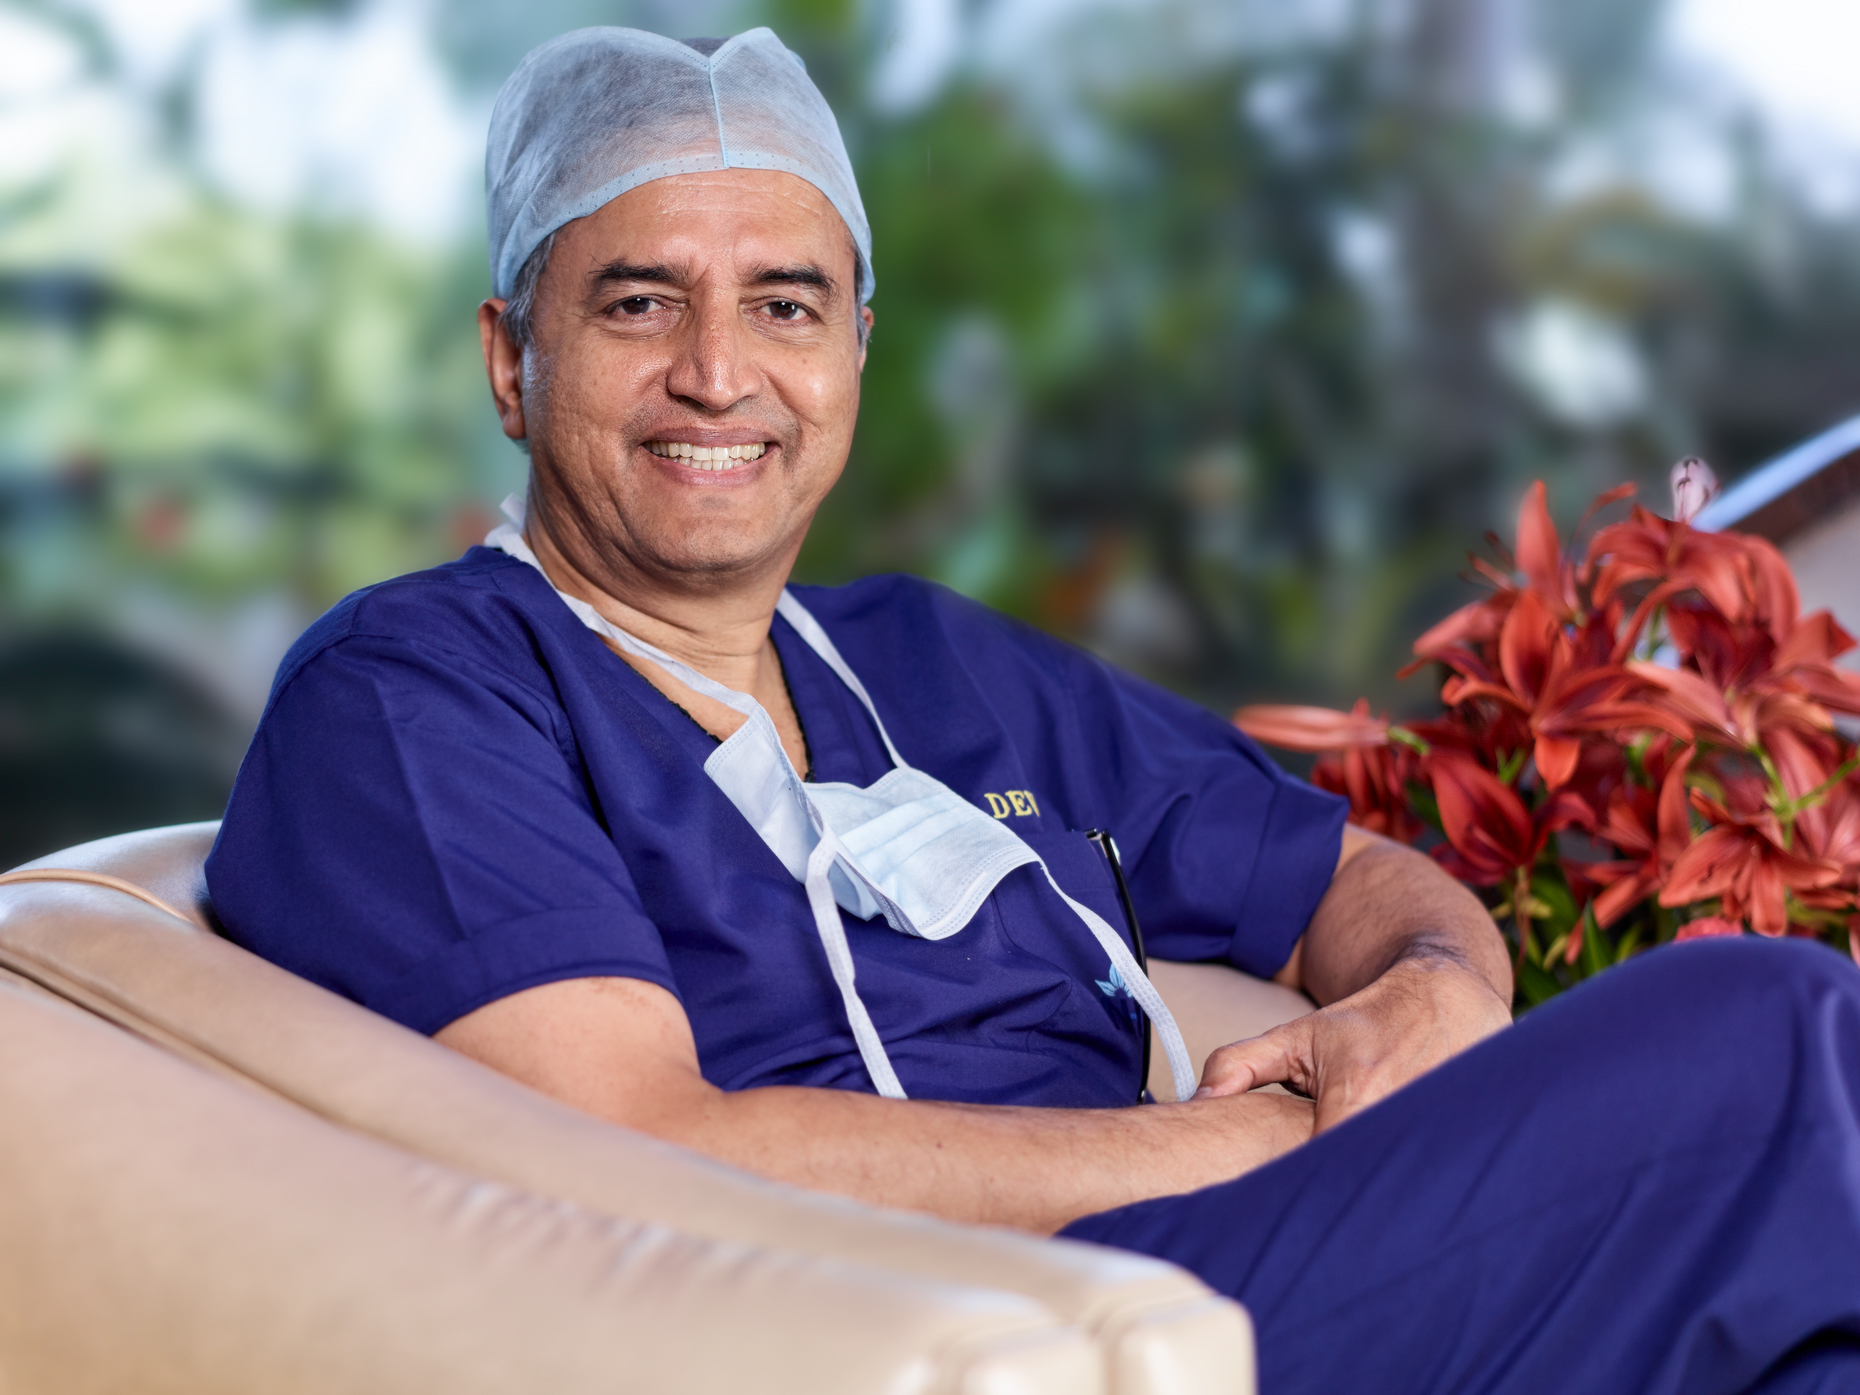 Creative Corporate Portrait for THE CEO MAGAZINE, of Dr. Devi Shetty, By Arindom Chowdhury